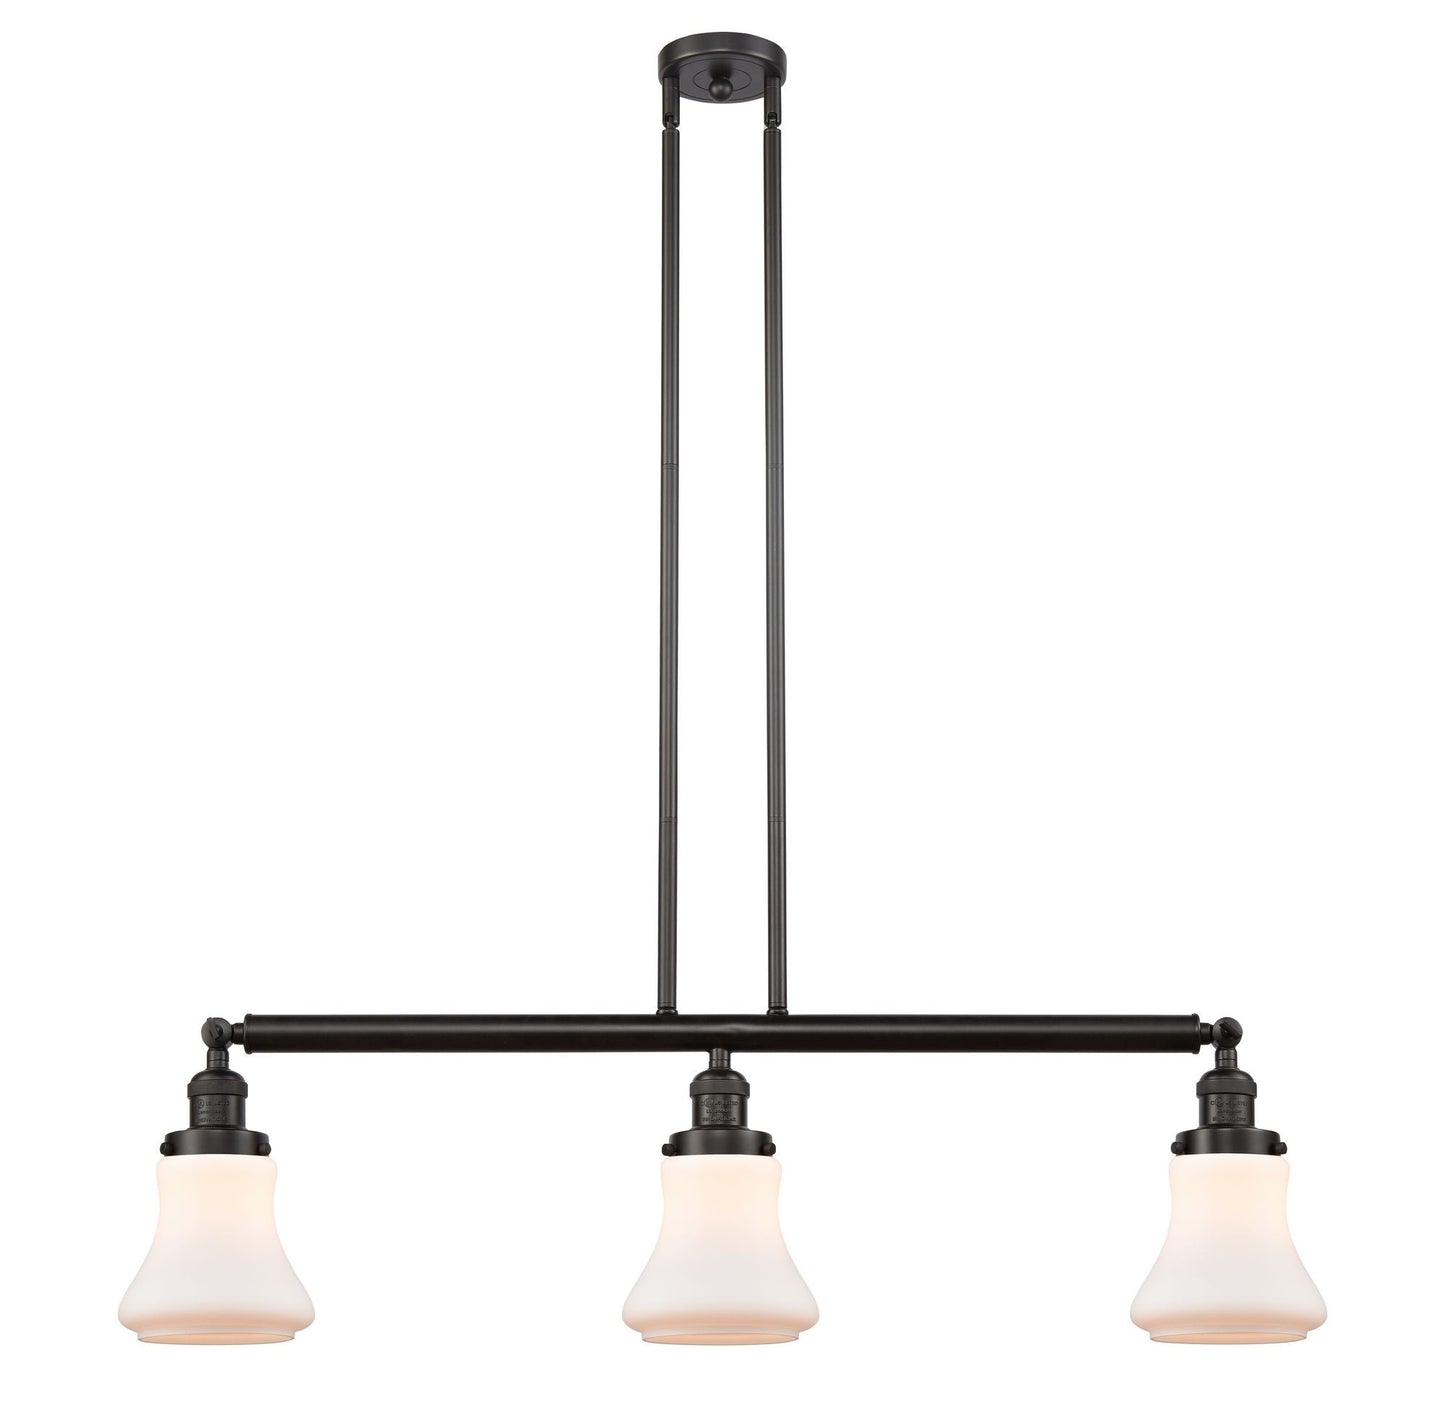 213-OB-G191 3-Light 38.75" Oil Rubbed Bronze Island Light - Matte White Bellmont Glass - LED Bulb - Dimmensions: 38.75 x 6.25 x 11<br>Minimum Height : 20.5<br>Maximum Height : 44.5 - Sloped Ceiling Compatible: Yes